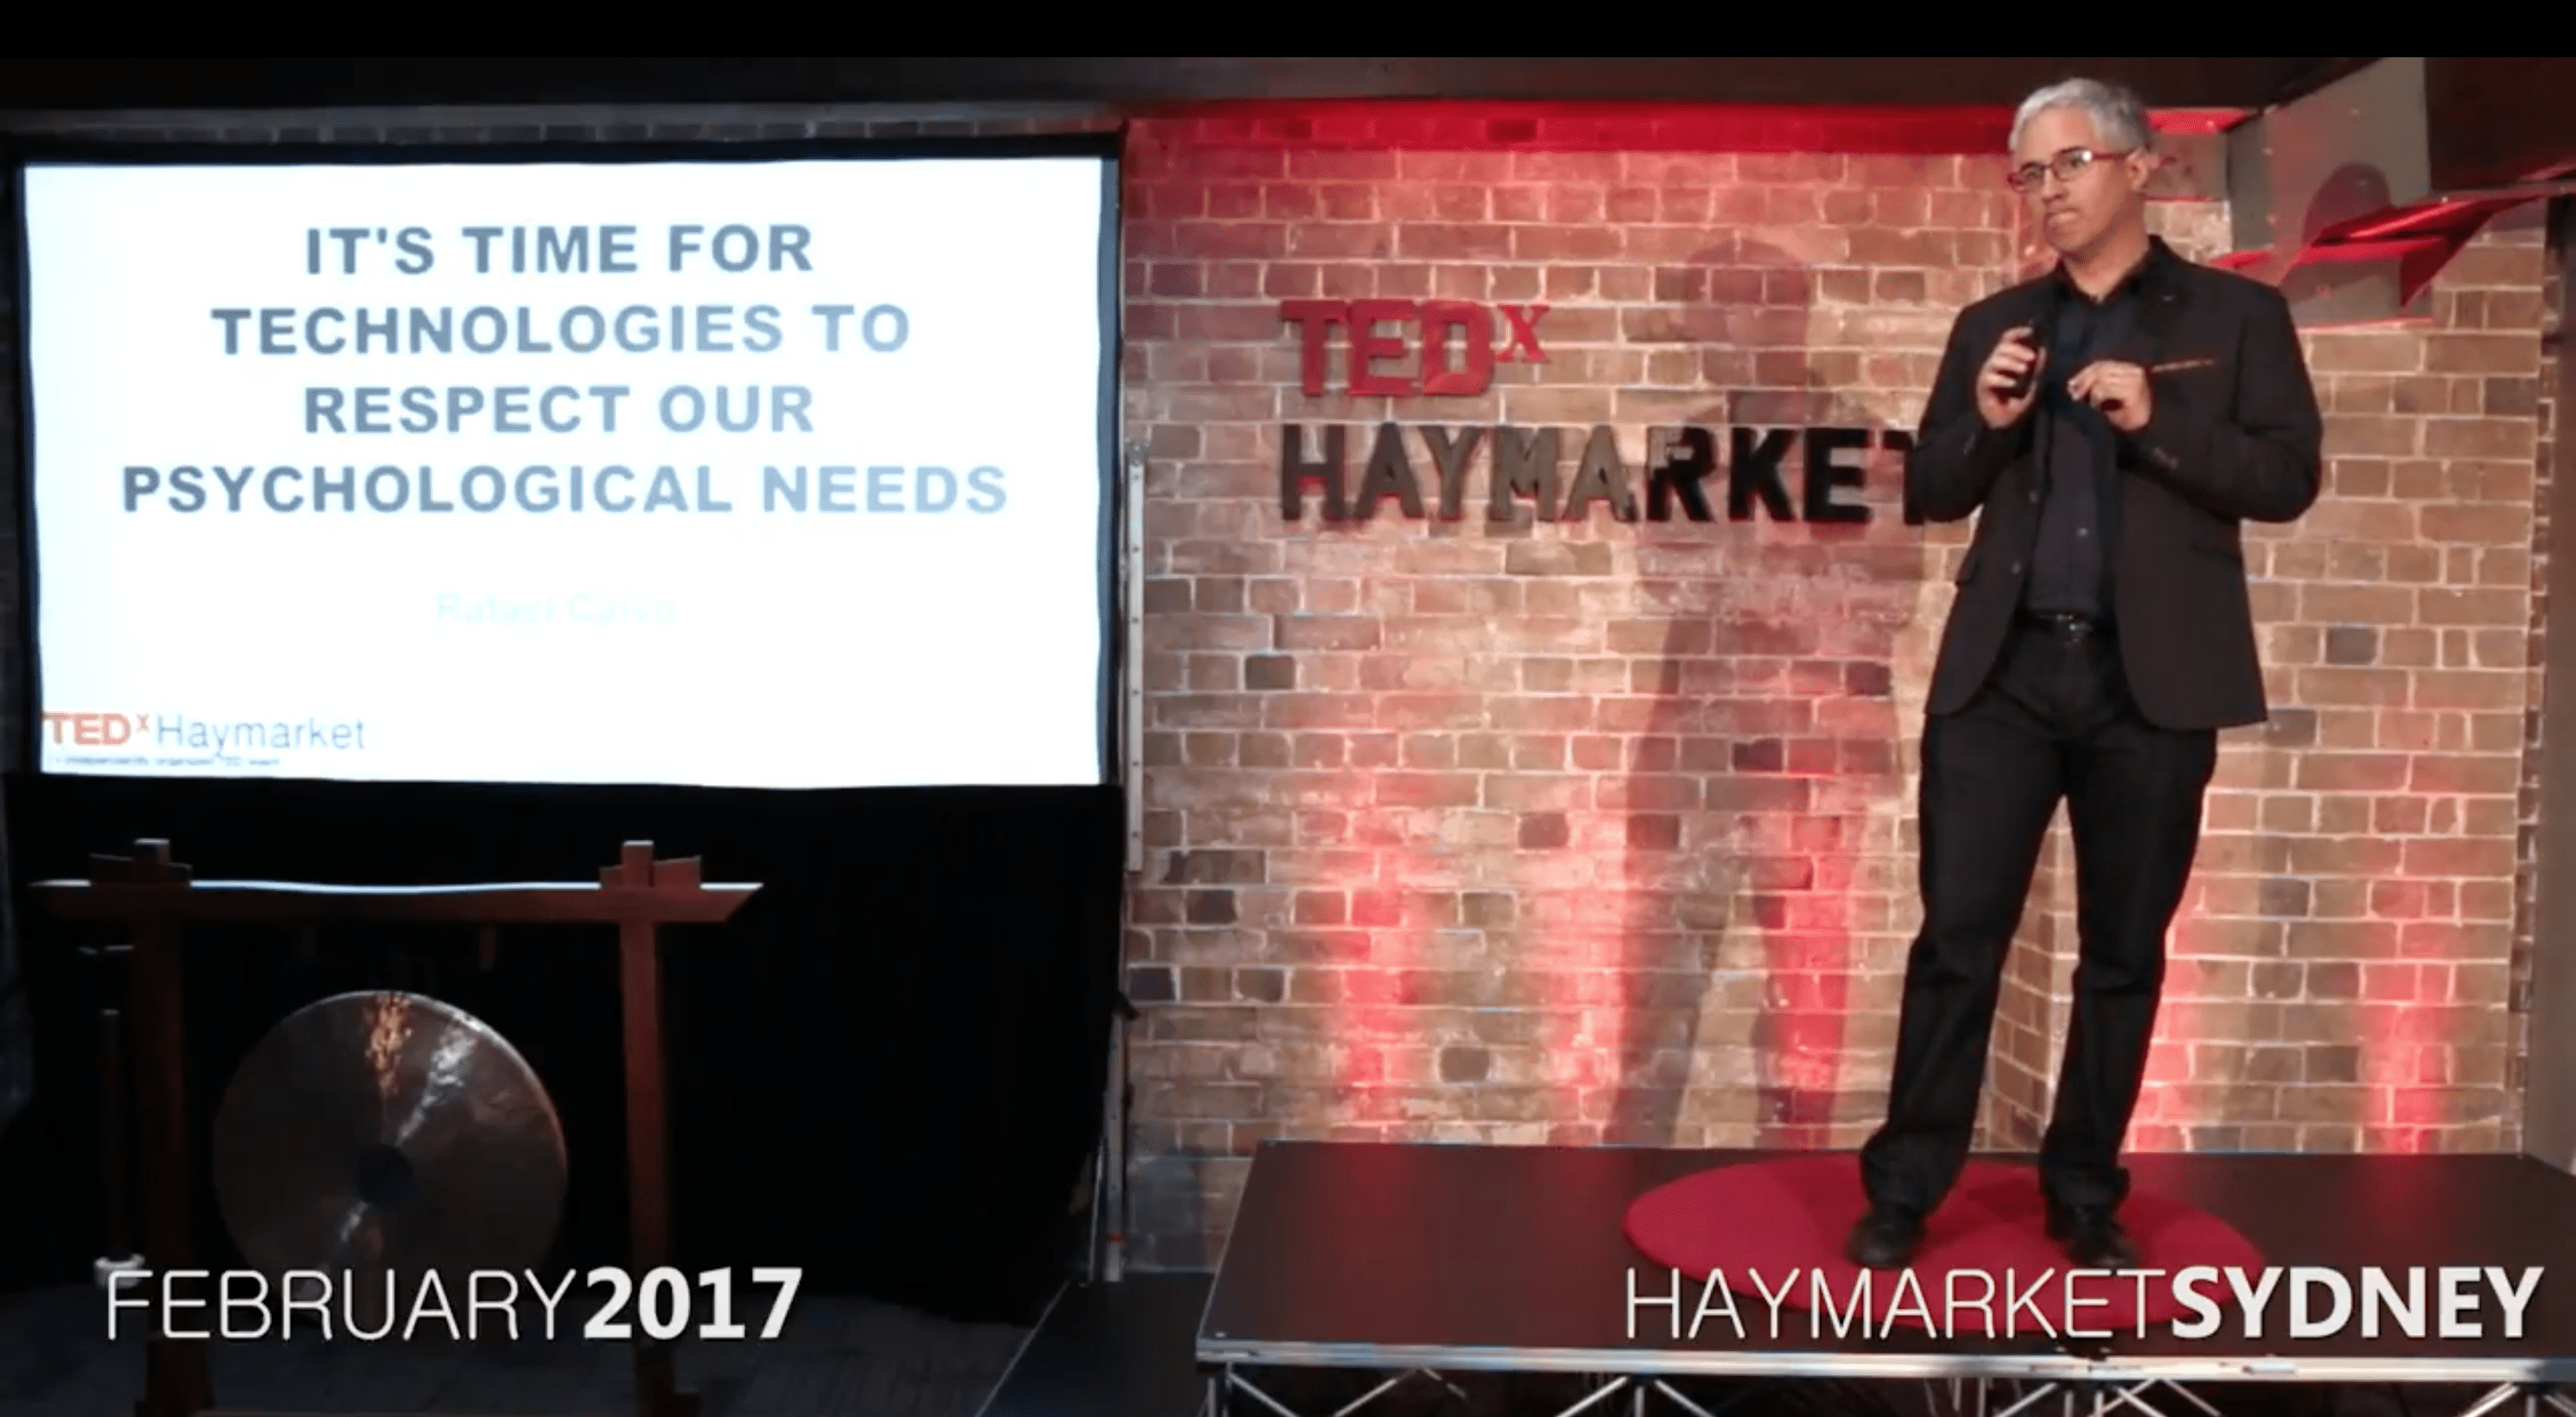 Time for technologies to respect our psychological needs  Rafael A Calvo  TEDxHaymarket